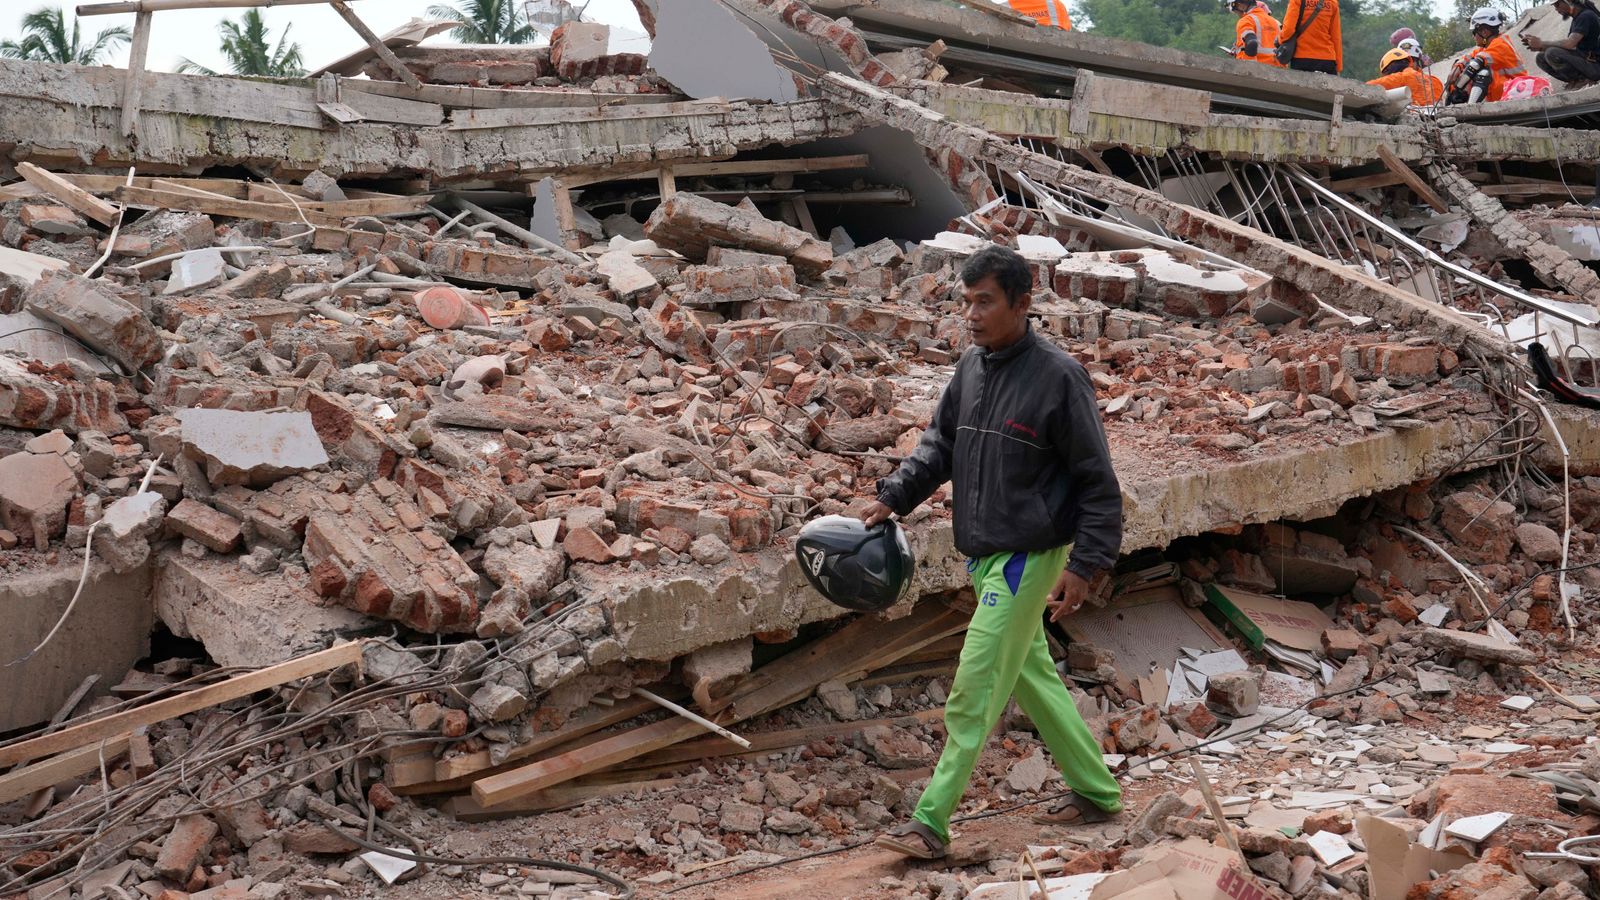 Indonesia earthquake: Many school children among 268 killed in West Java